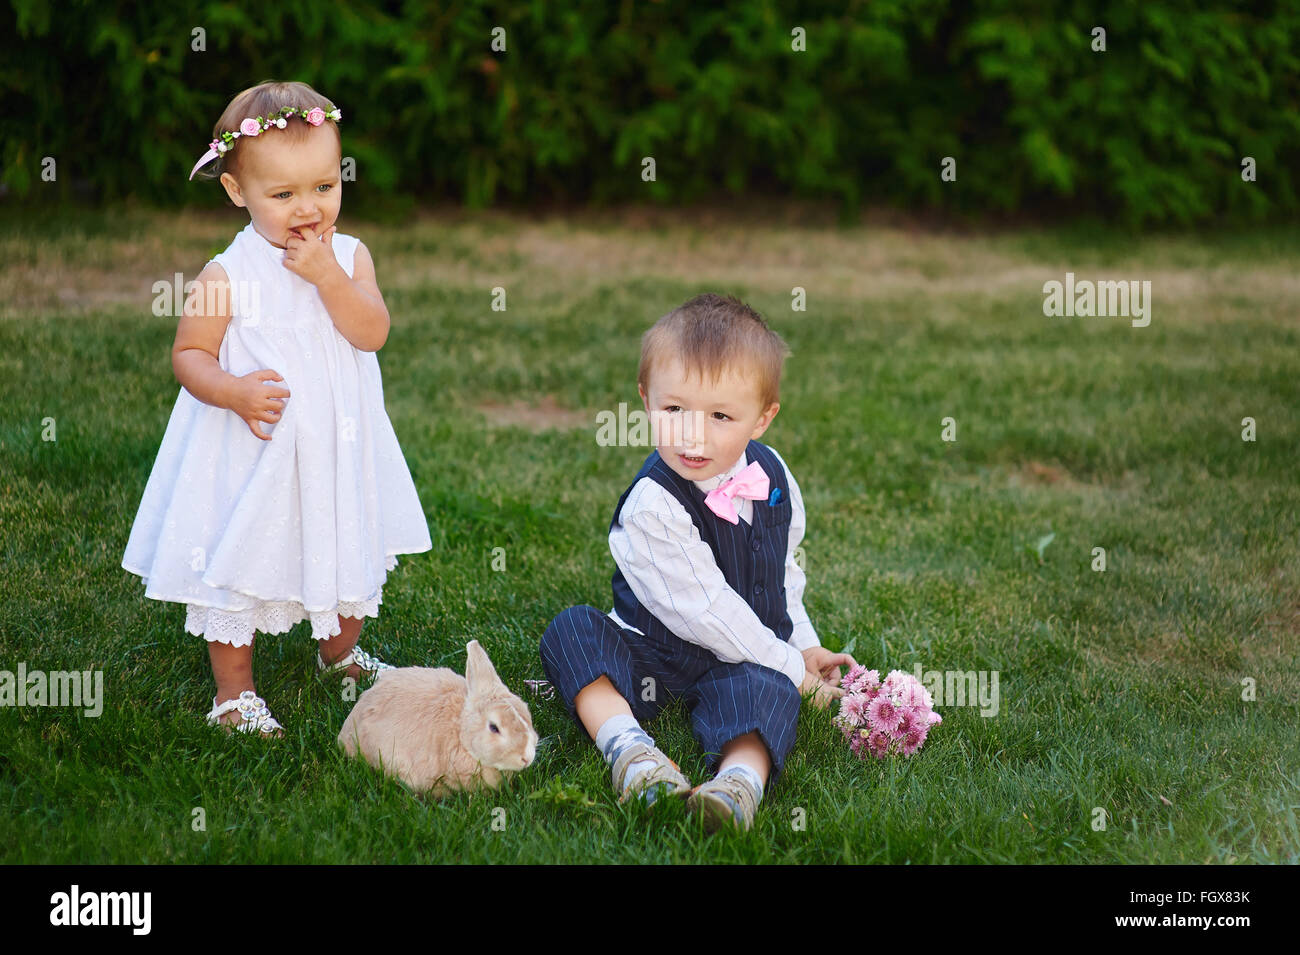 little boy with the girl and rabbit playing in the grass Stock Photo